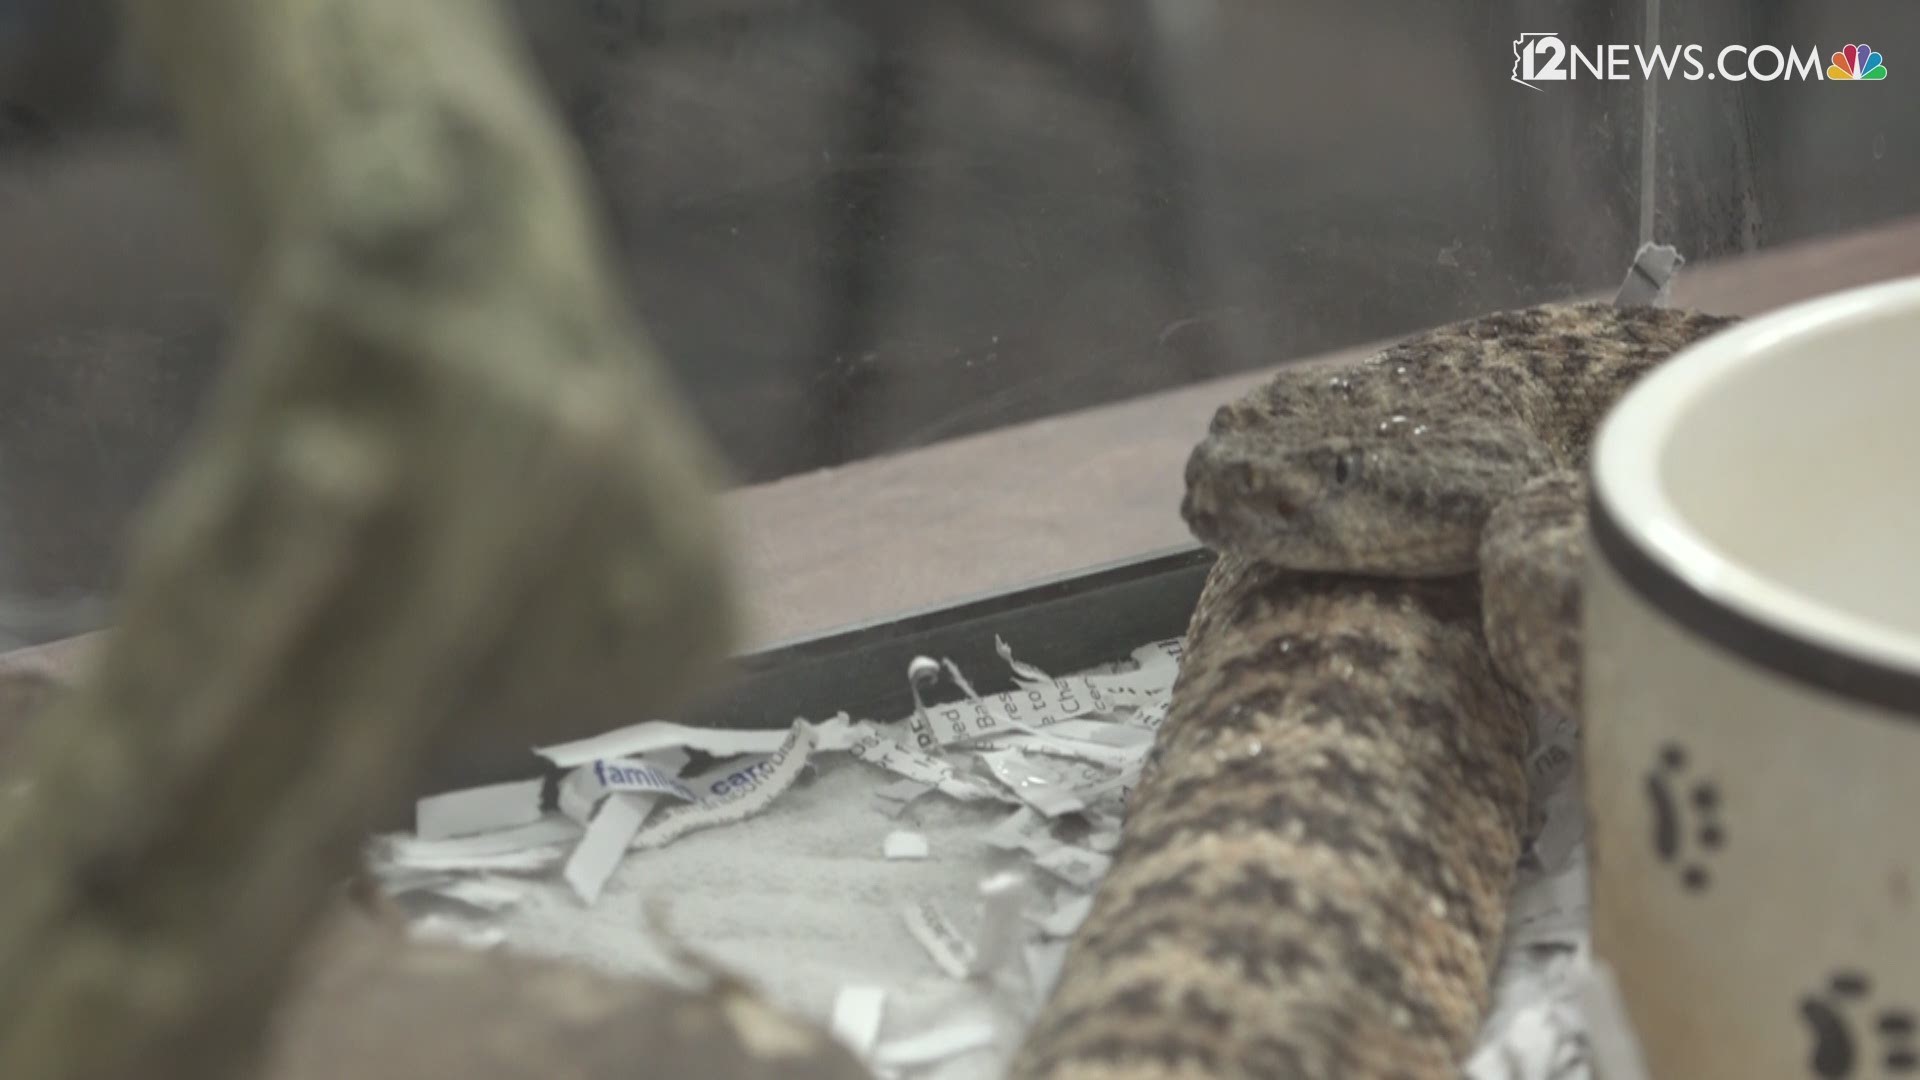 AZDGF's Amy Burnett said there are less than a dozen rattlesnake-bite deaths in the U.S. each year and some years that number is closer to five.